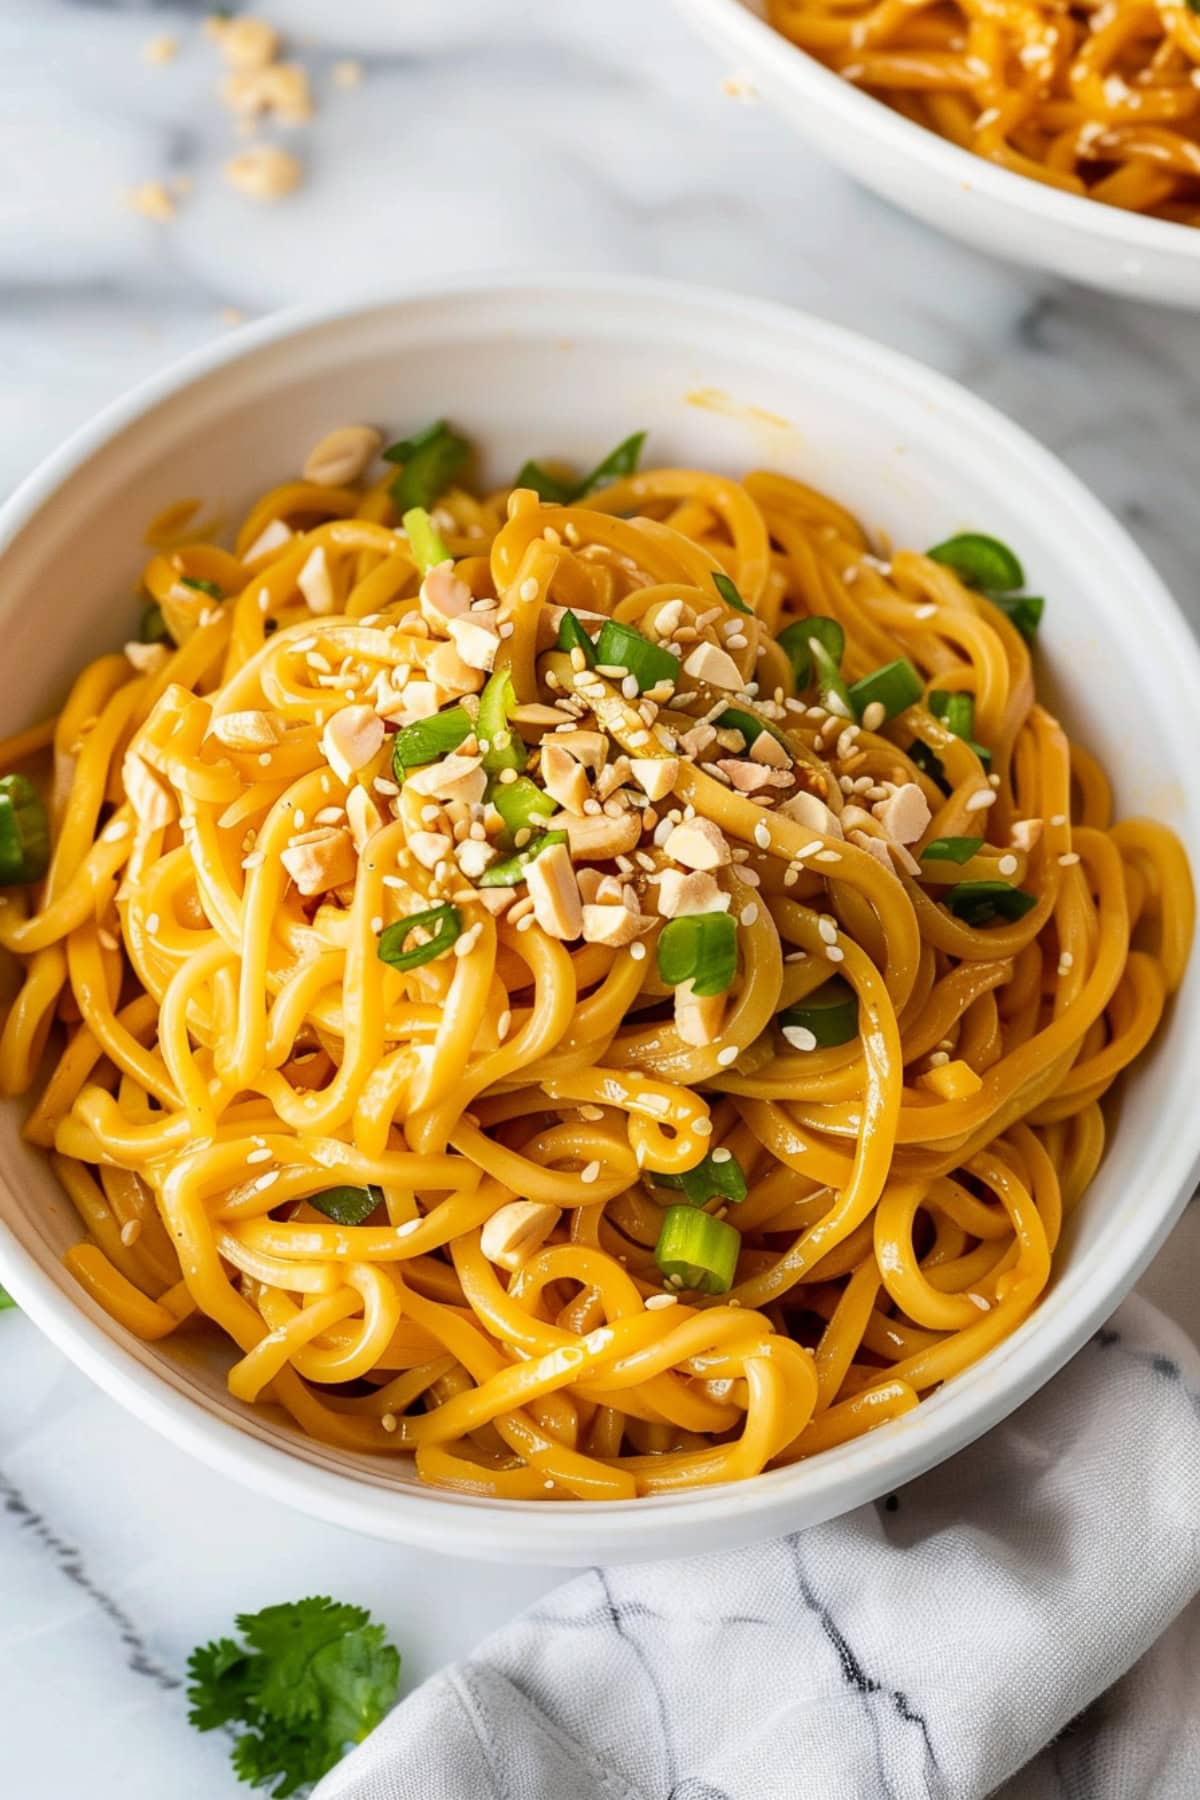 Classic sesame noodles, served chilled and topped with thinly green onions and crushed peanuts.